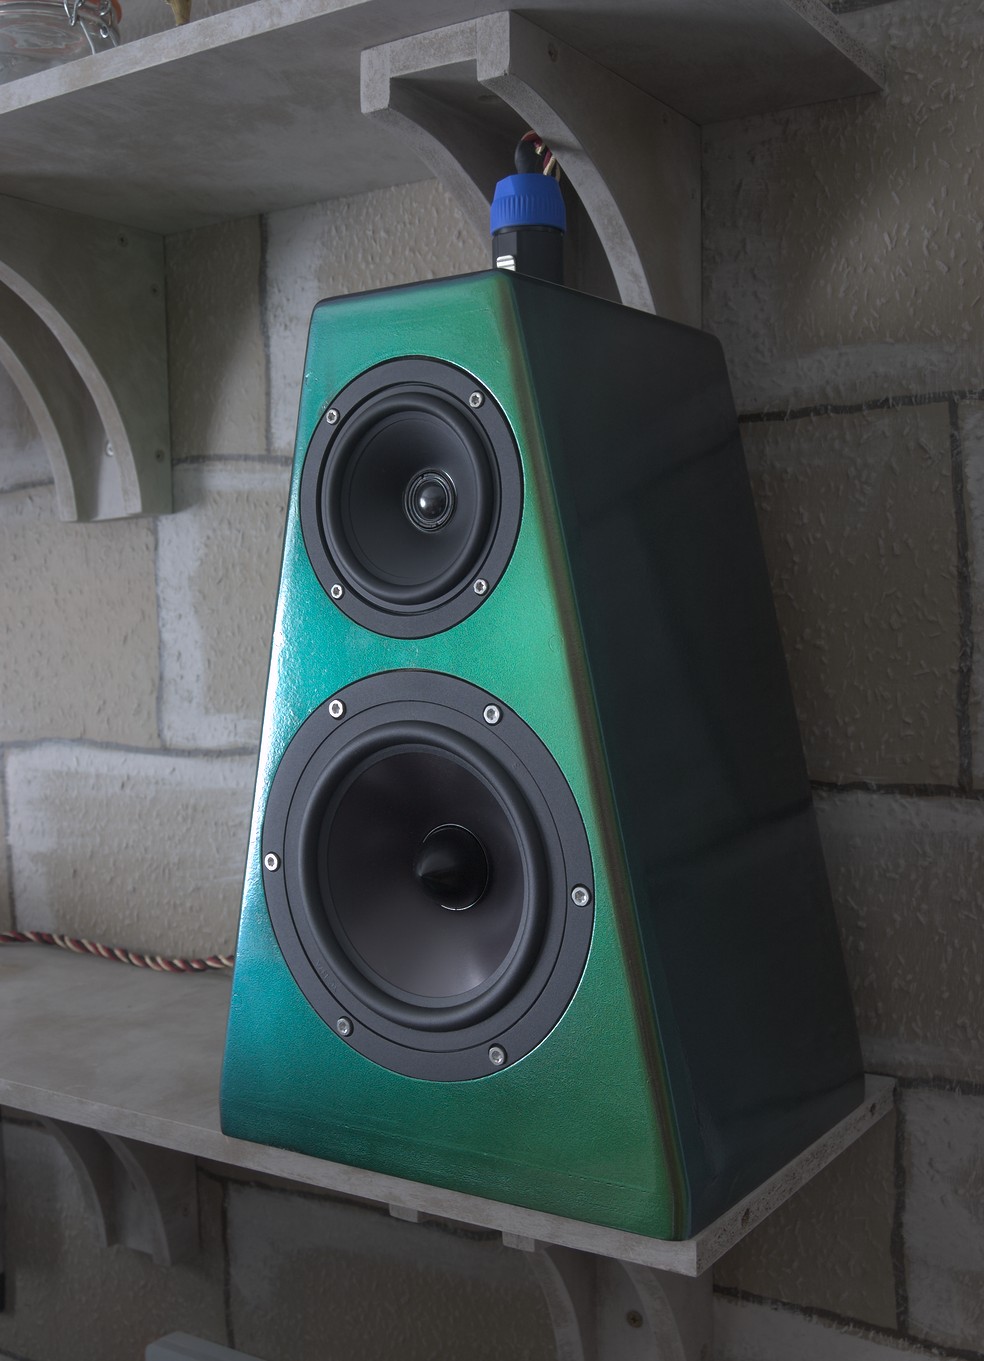 A completed speaker sitting on a shelf.